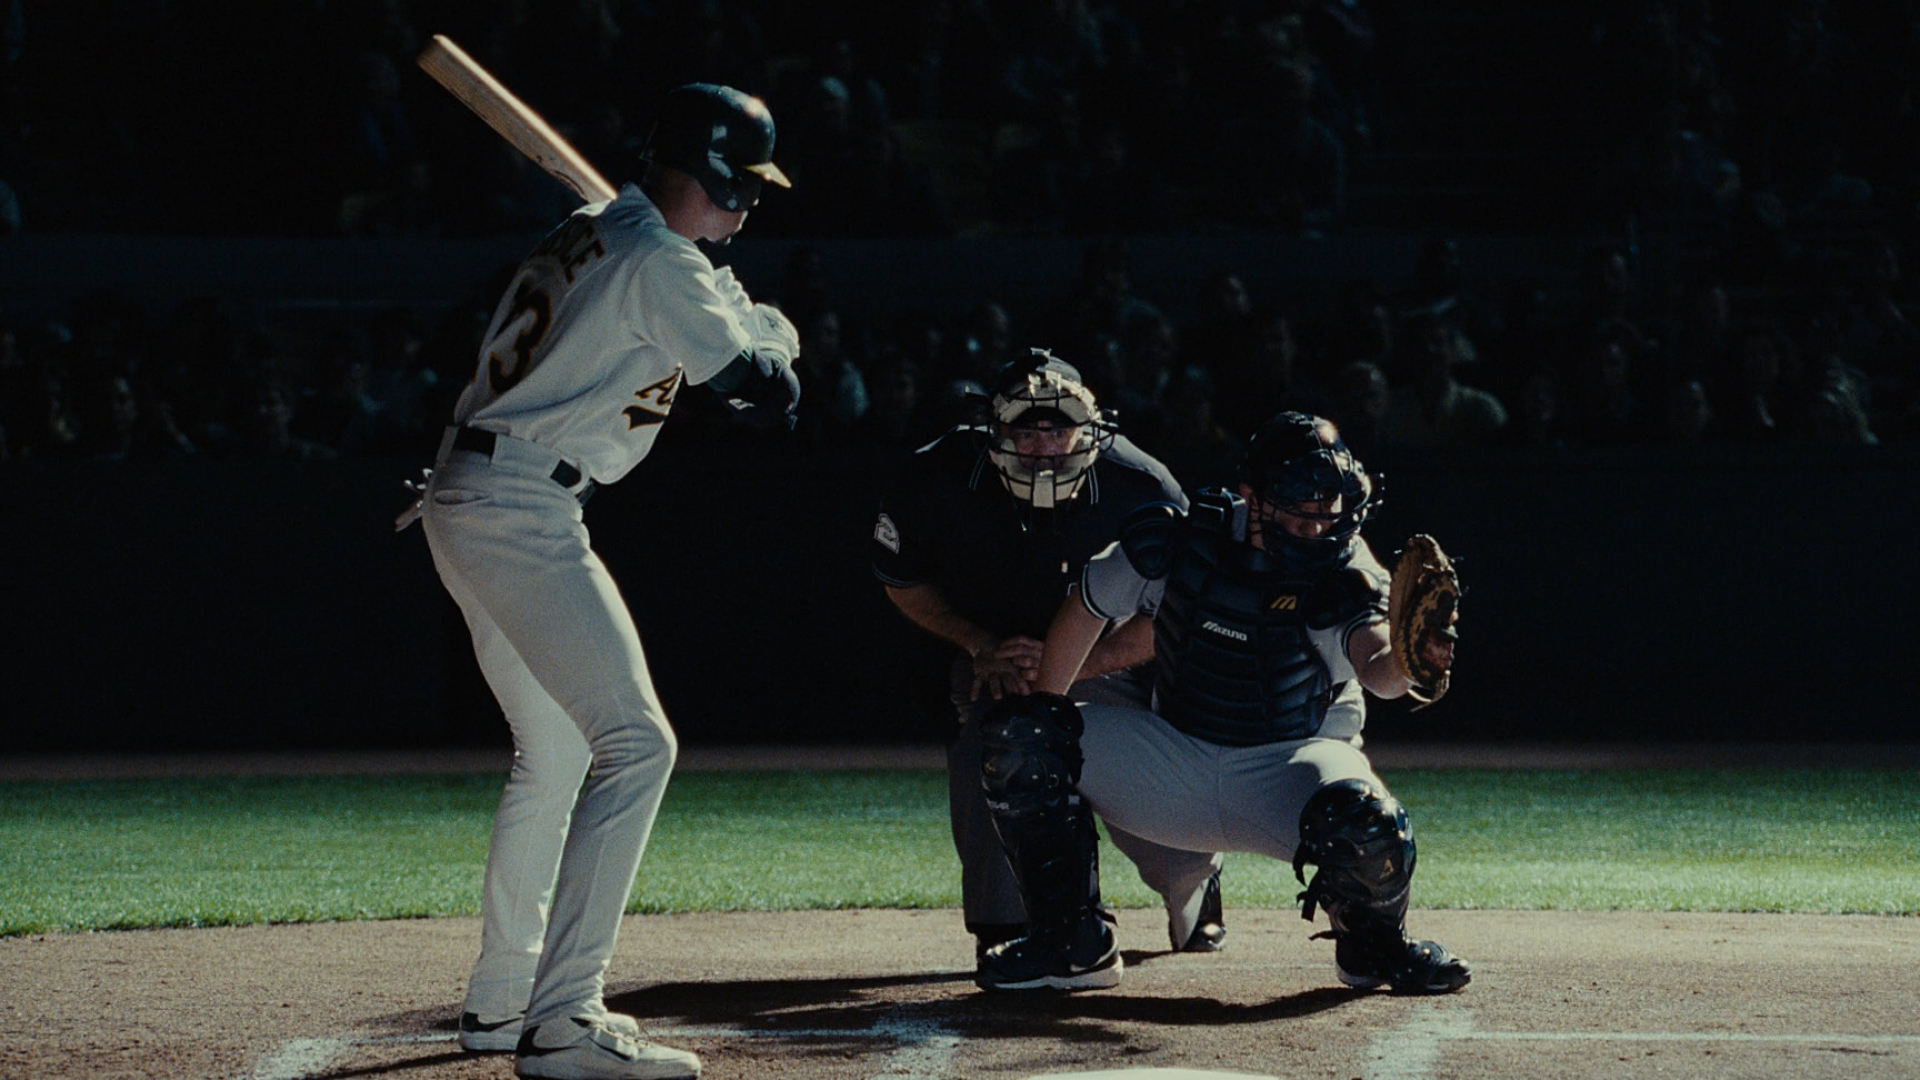 Moneyball: The movie is based on the book "Moneyball: The Art of Winning an Unfair Game". 1920x1080 Full HD Background.